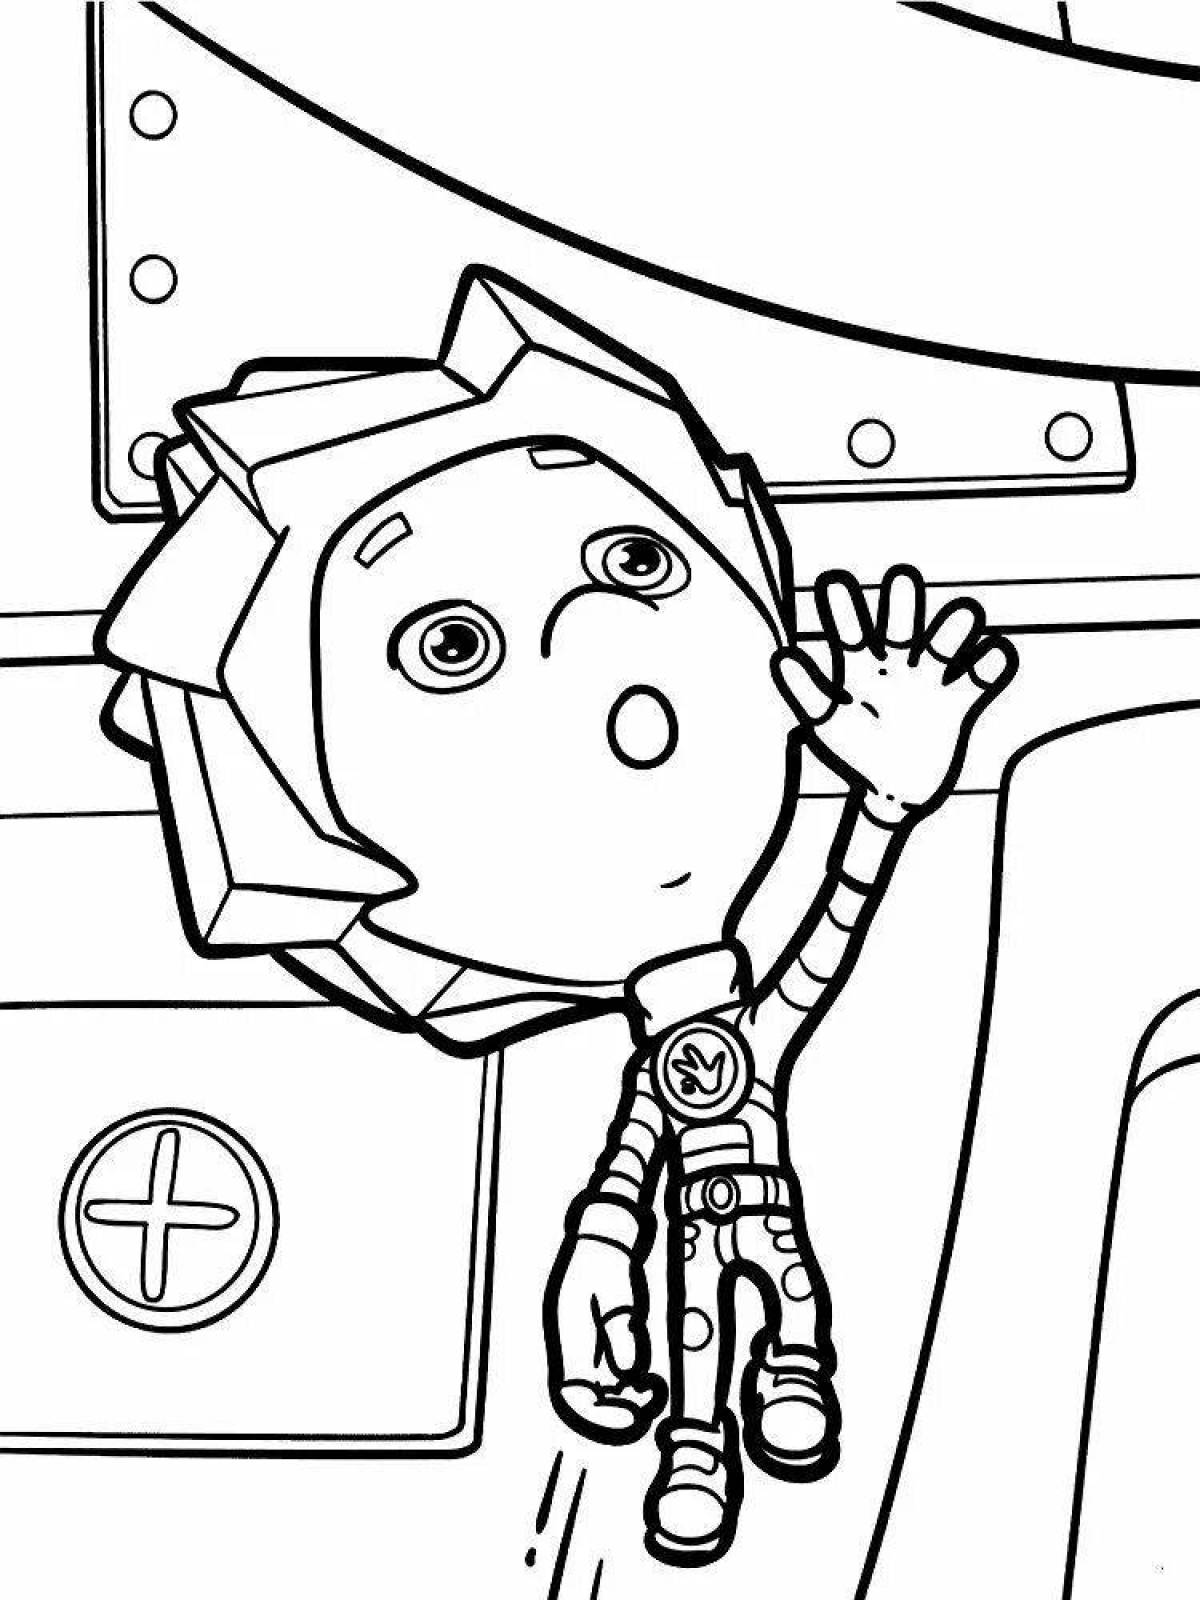 Amazing cartoon fixies coloring pages